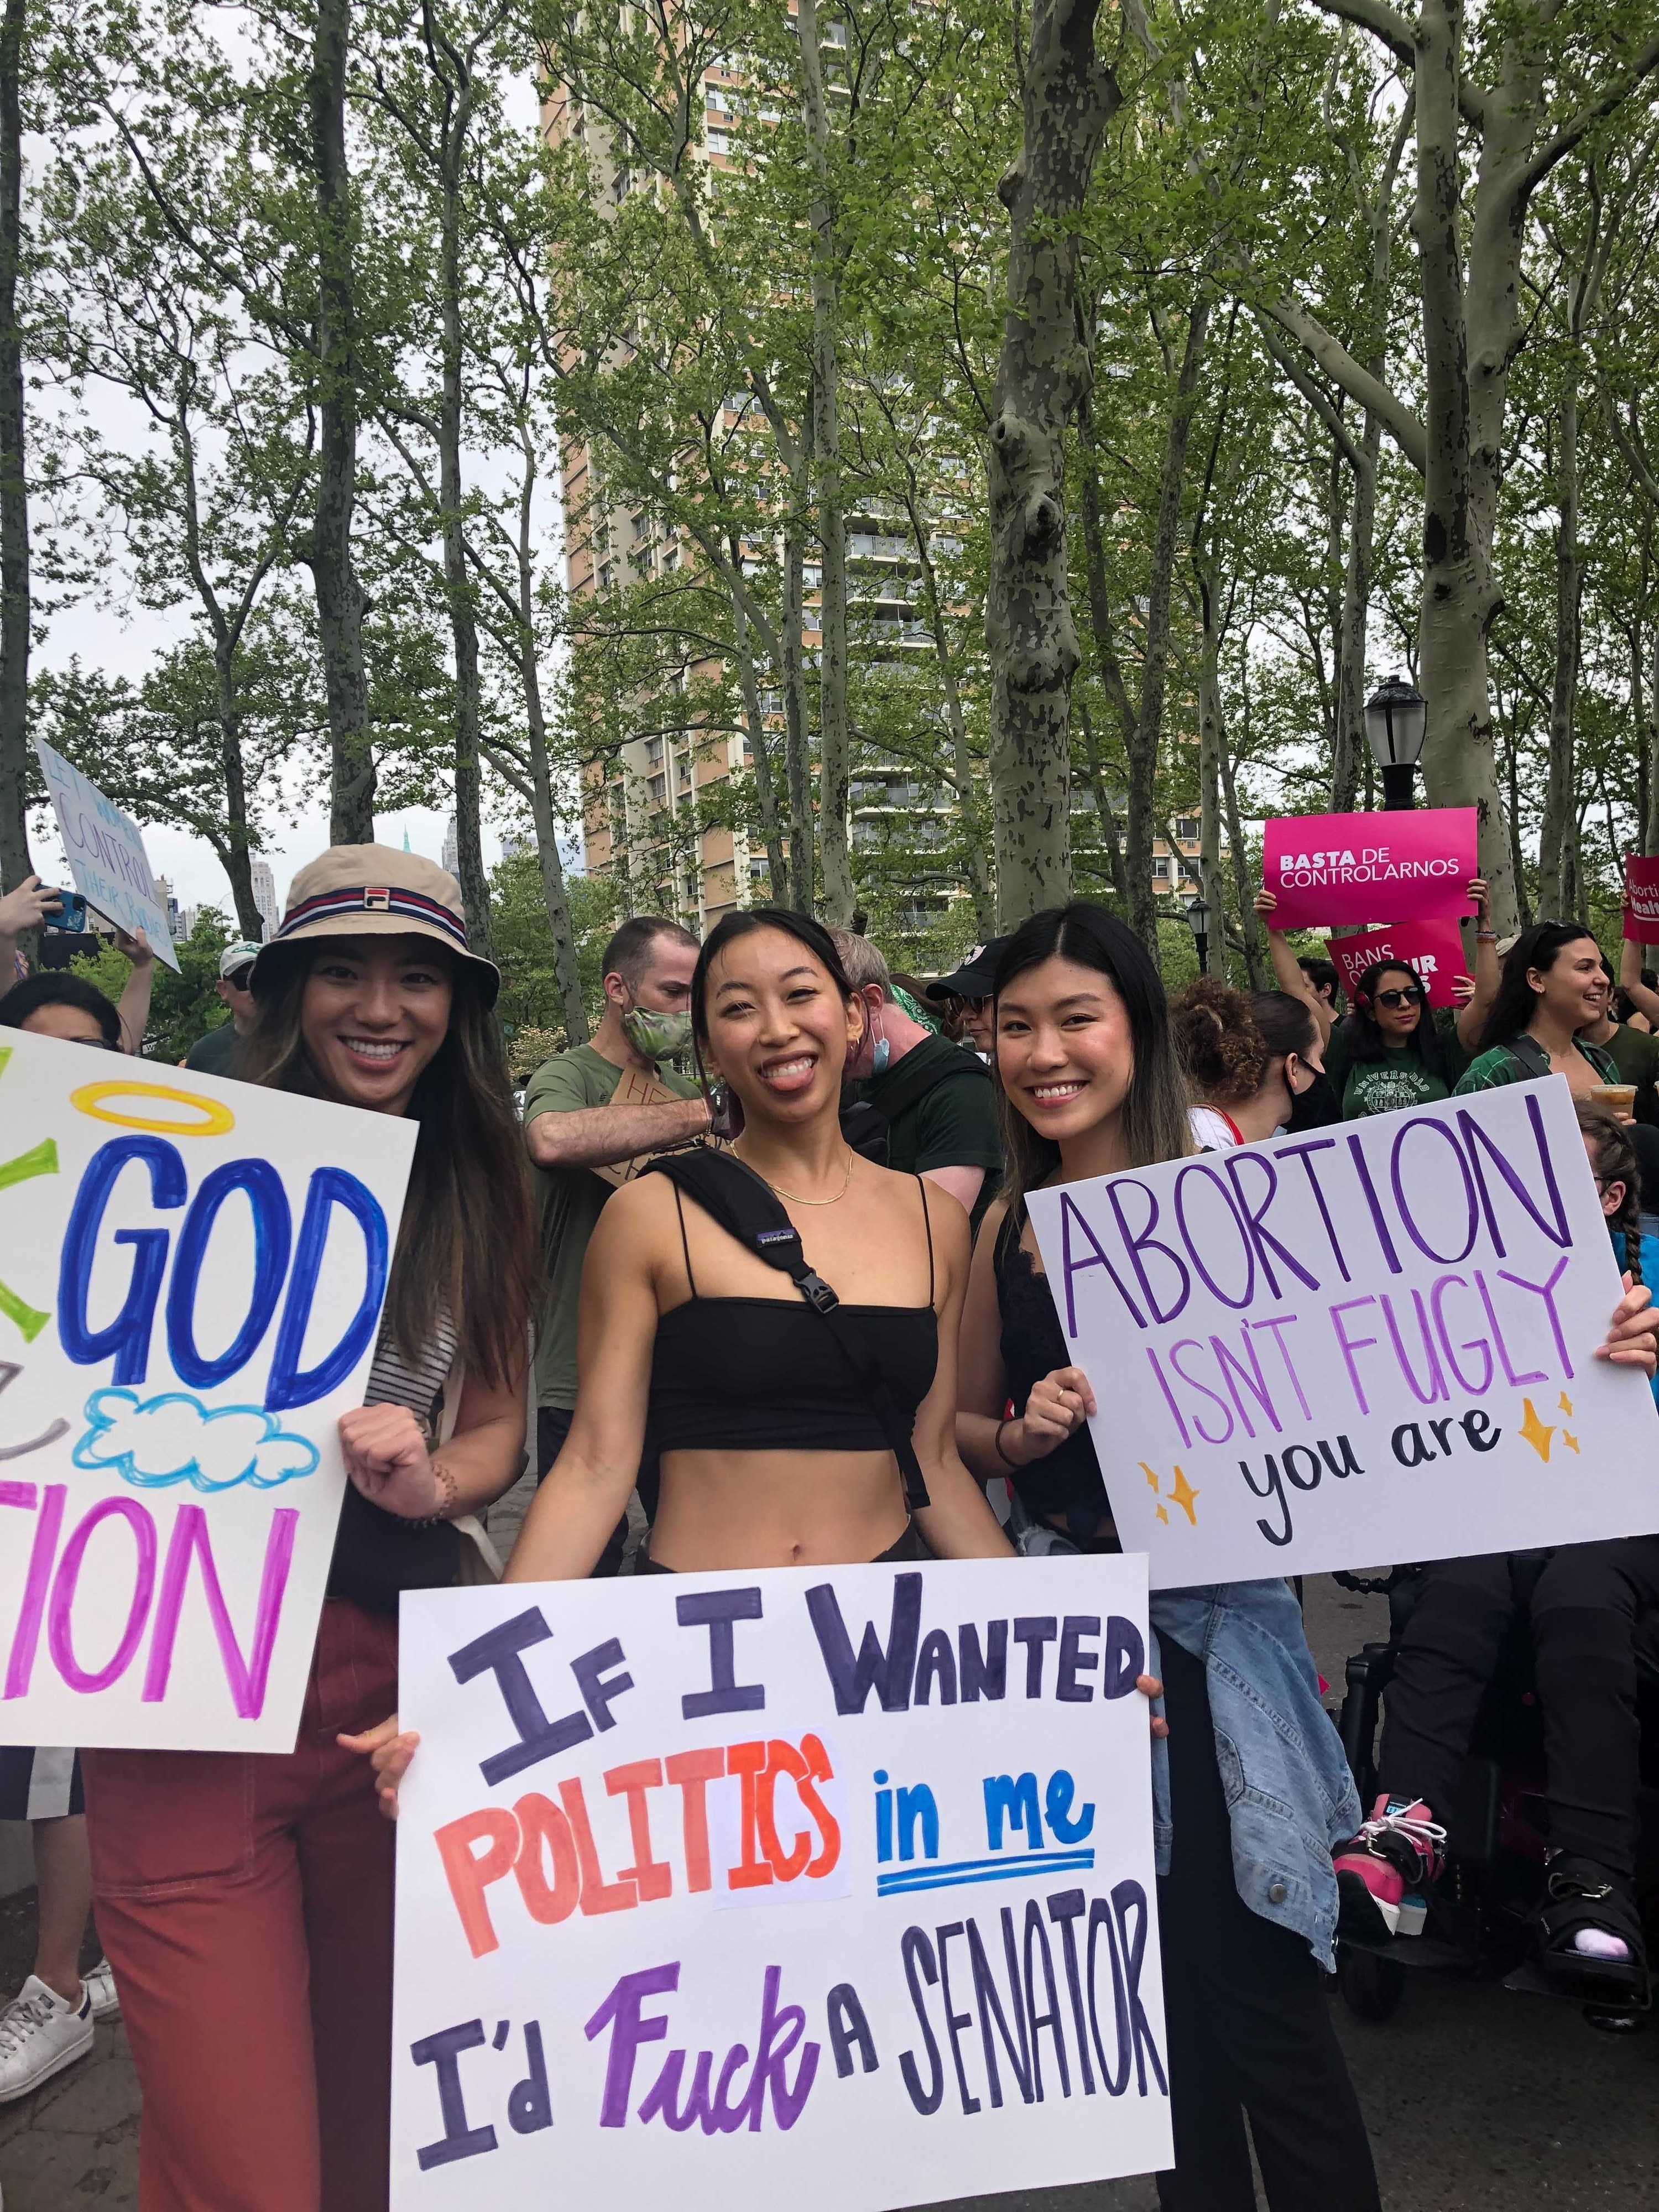 Signs reading &quot;If I wanted politics in me, I&#x27;d fuck a senator&quot; and &quot;Abortion isn&#x27;t fugly, you are&quot;